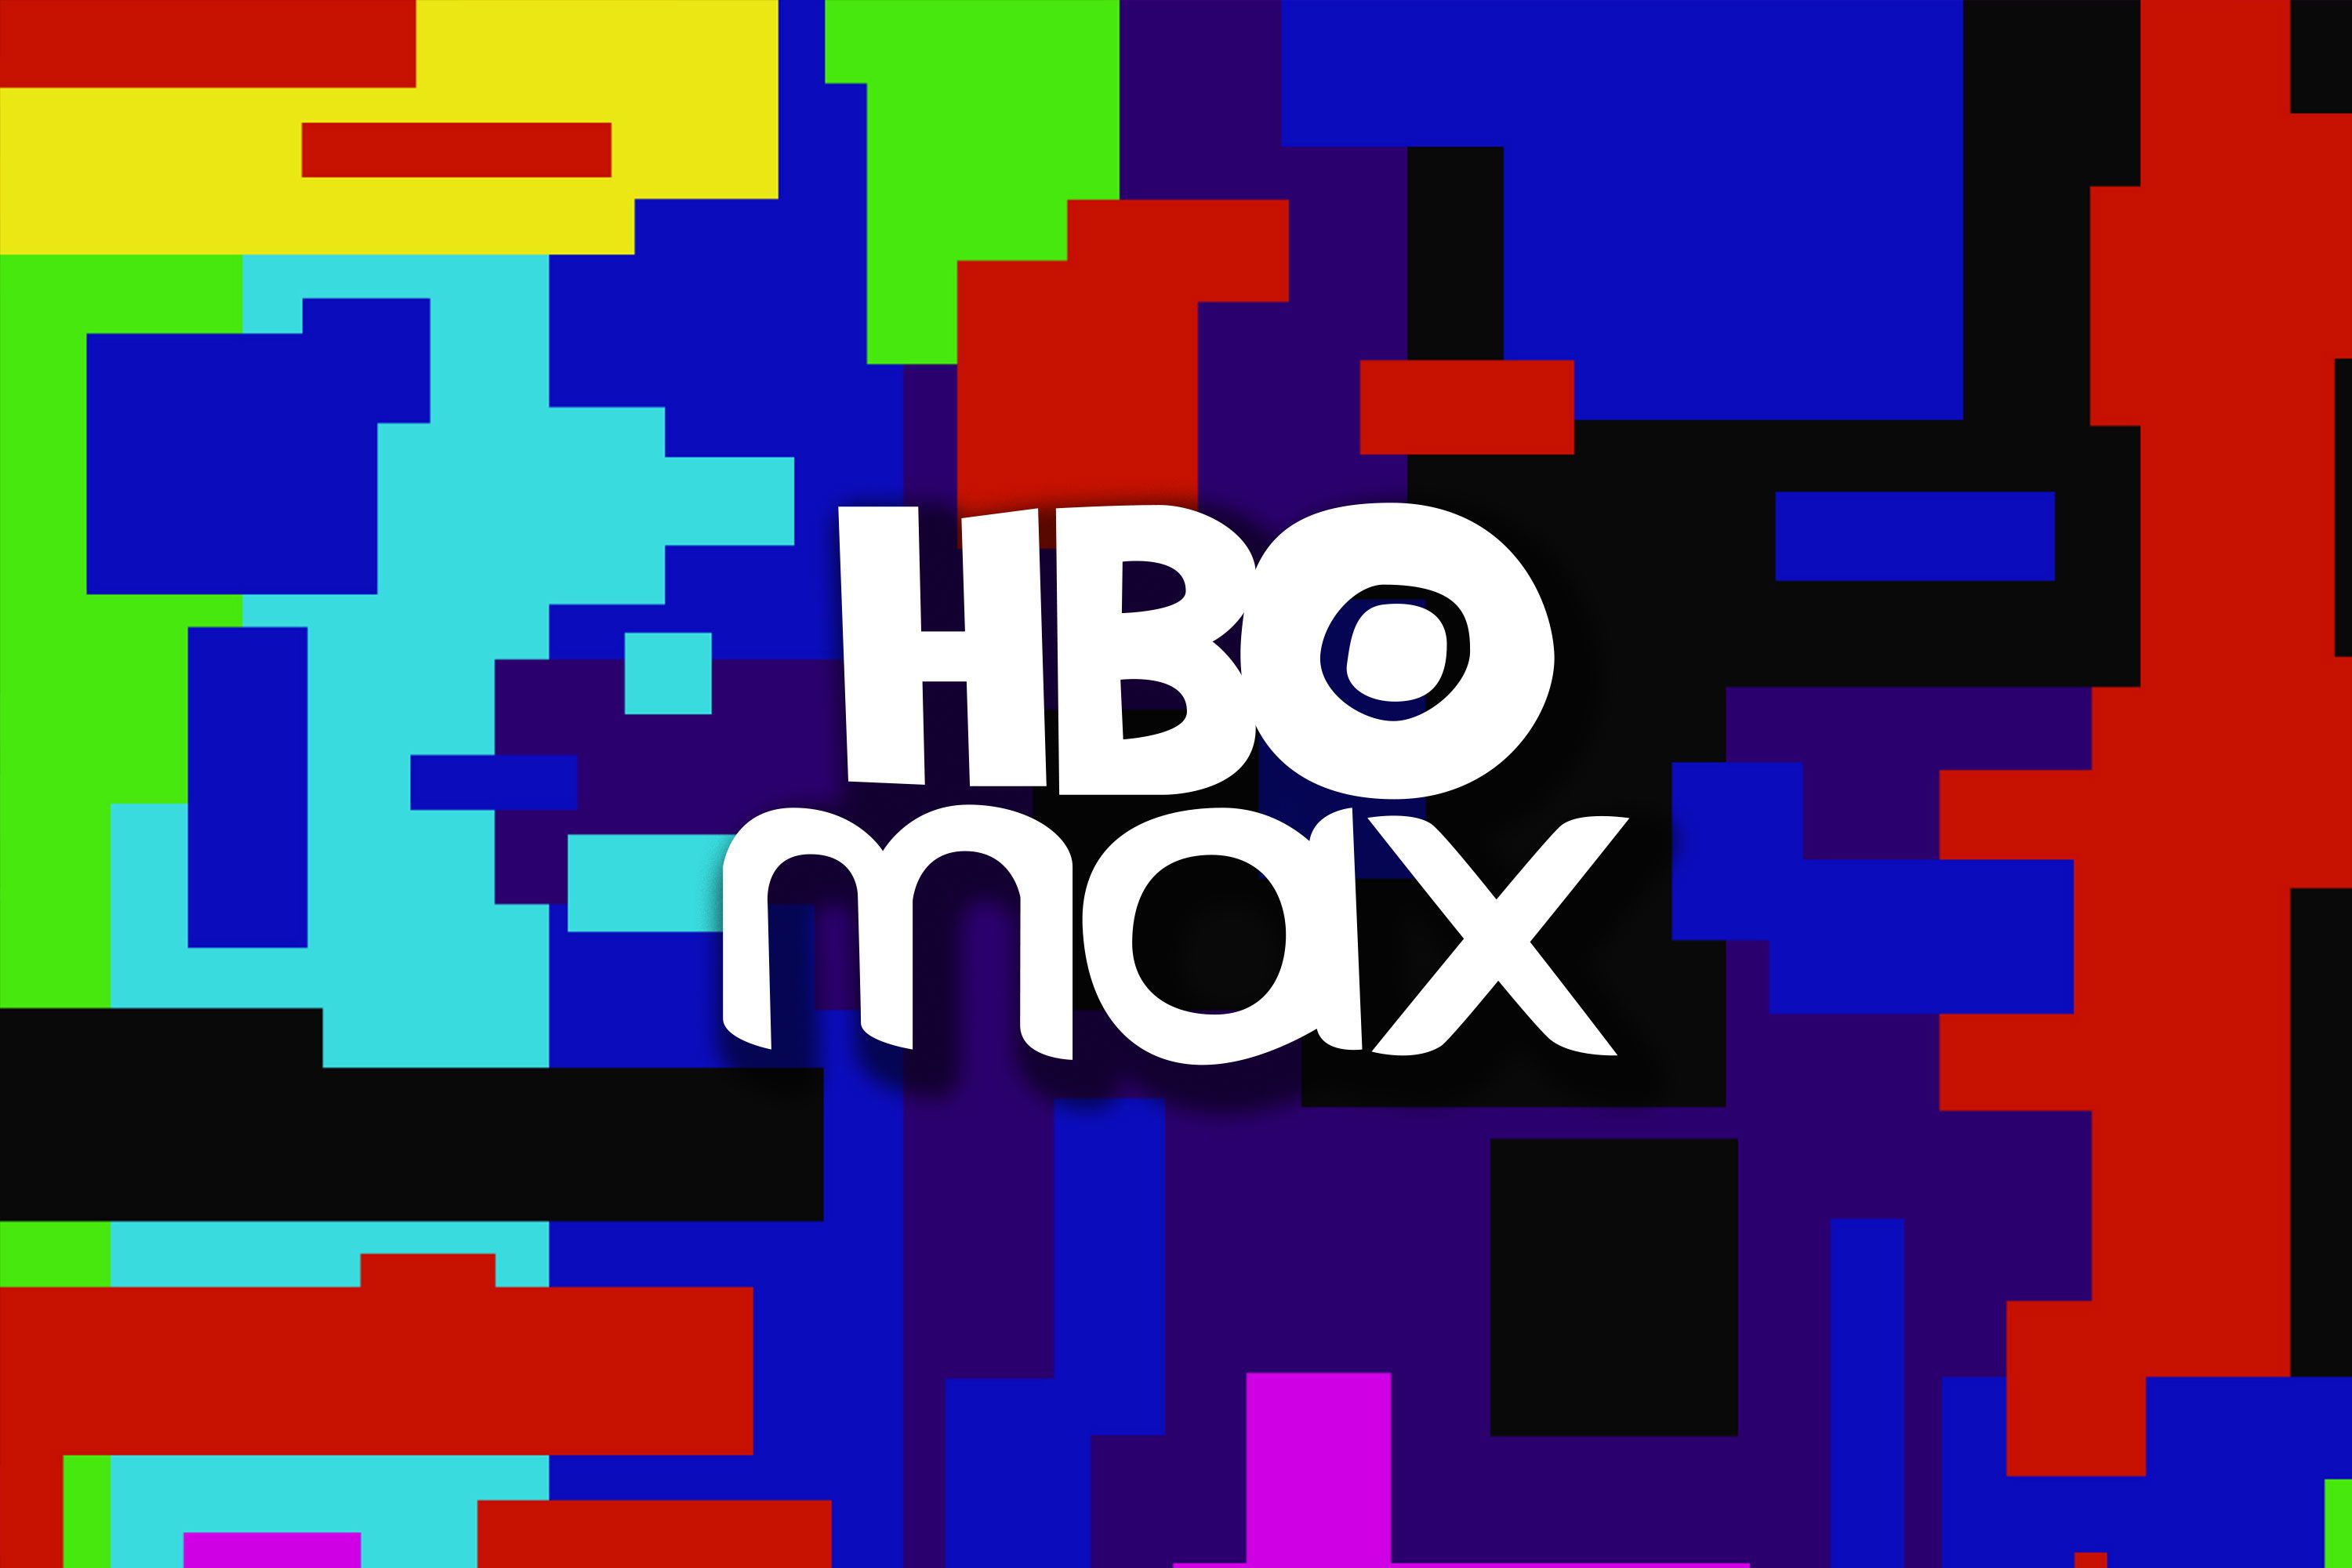 Three amazing HBO Max 2021 Black Friday deals you can get